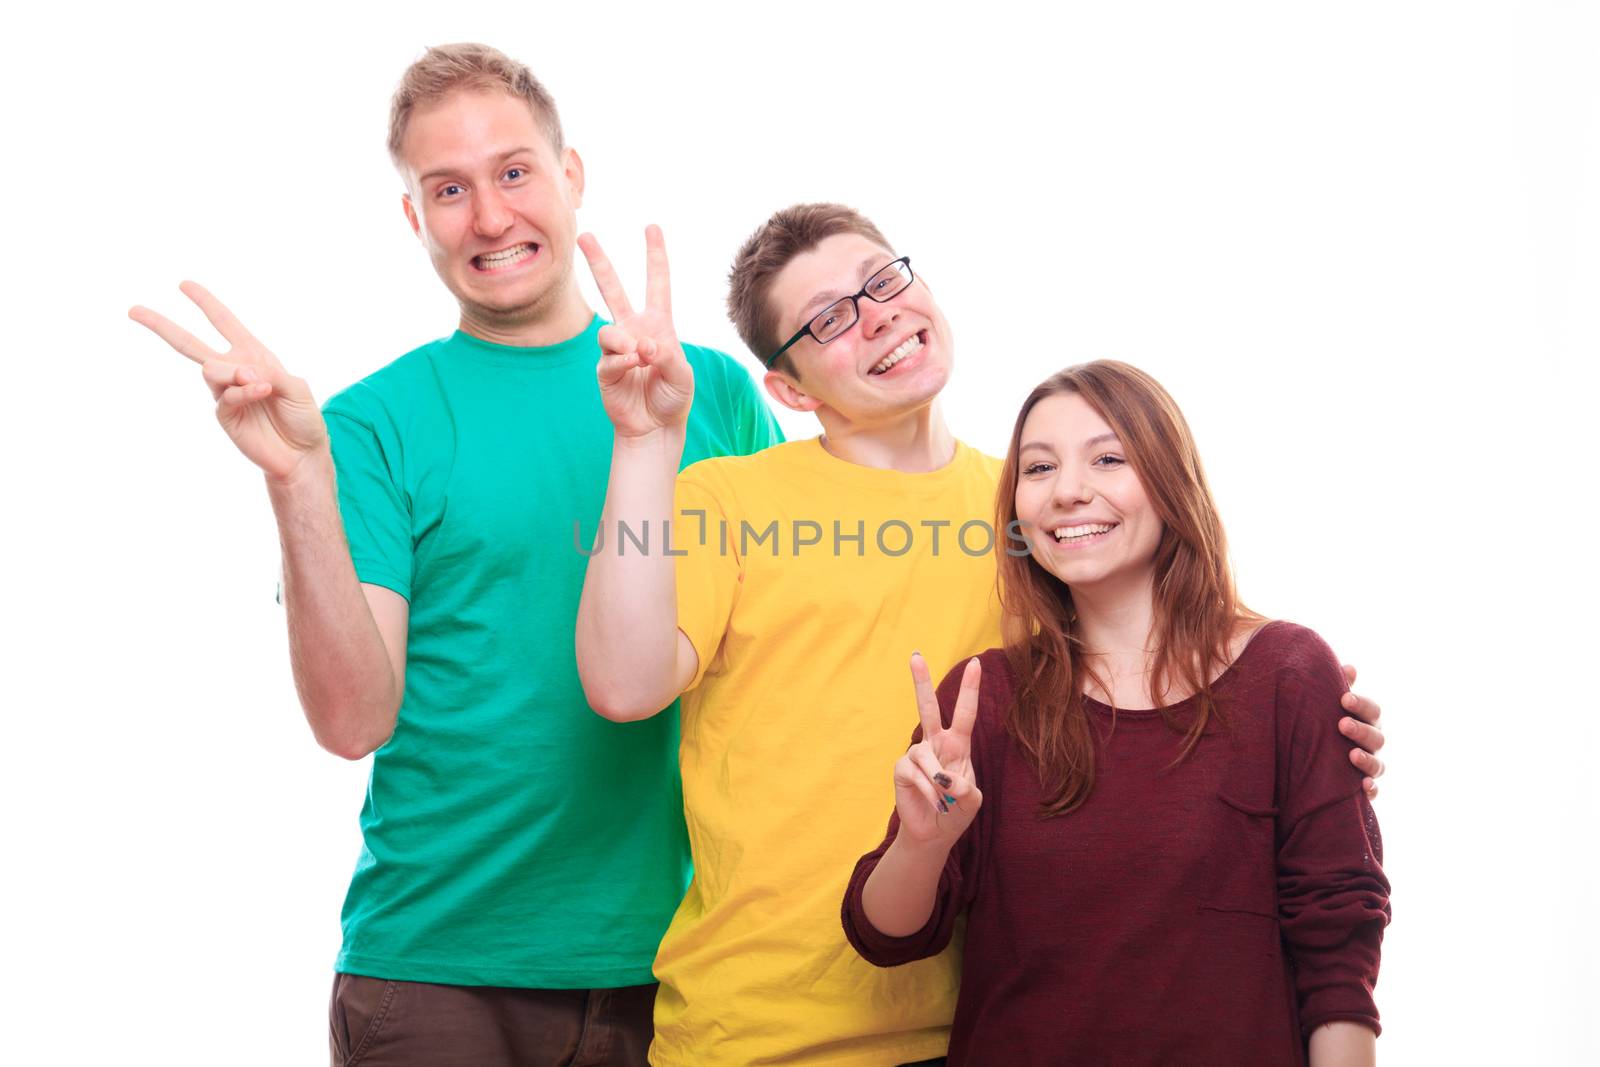 Three people showing victory sign - studio shoot 